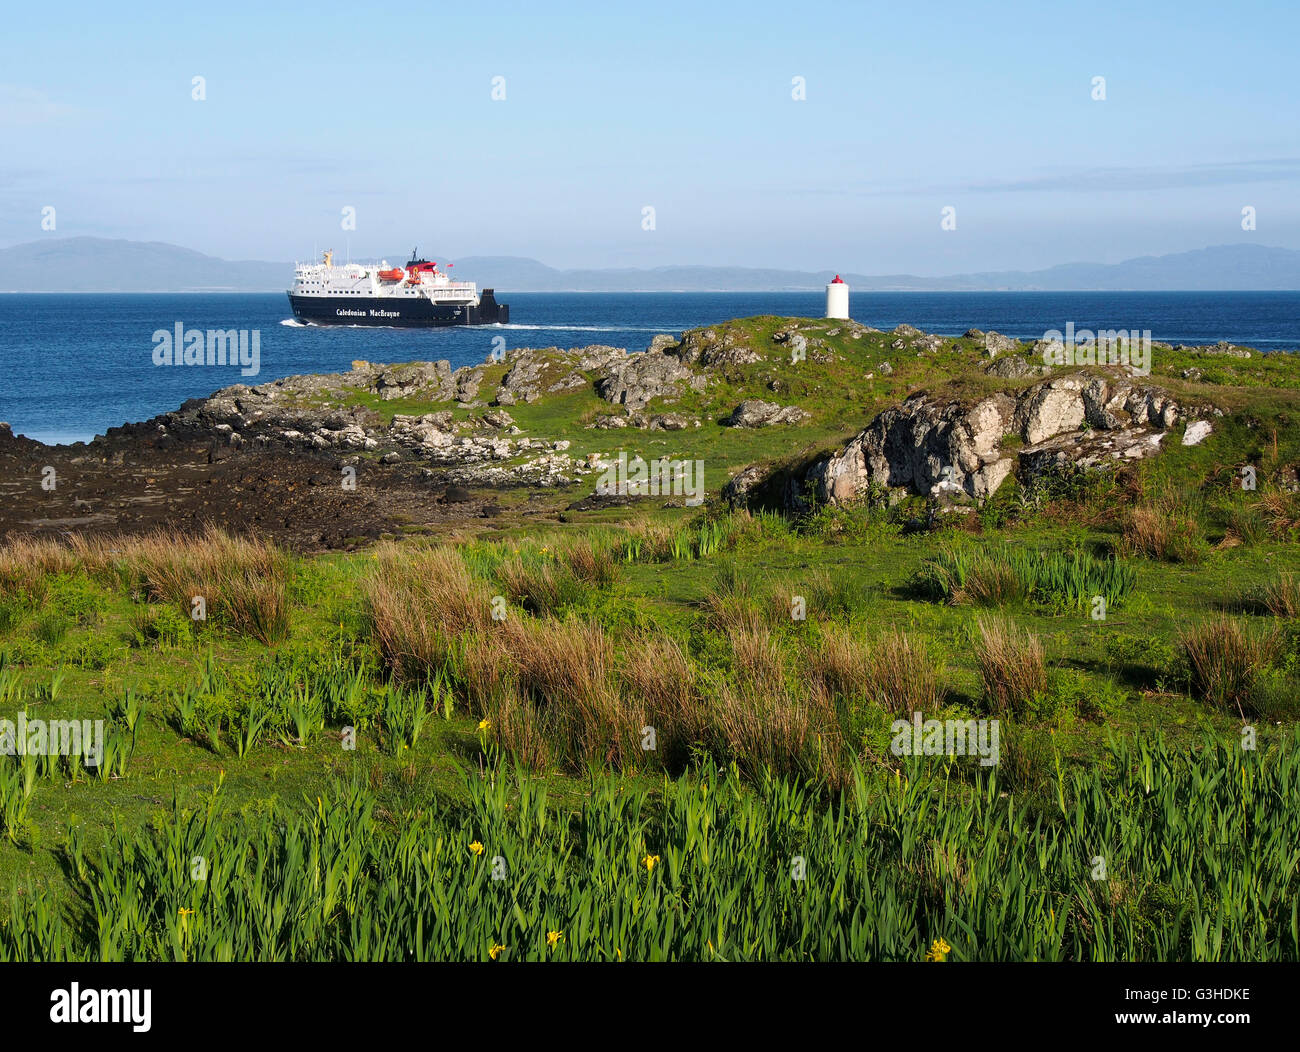 Caledonian Macbrayne ferry Colonsay Banque D'Images